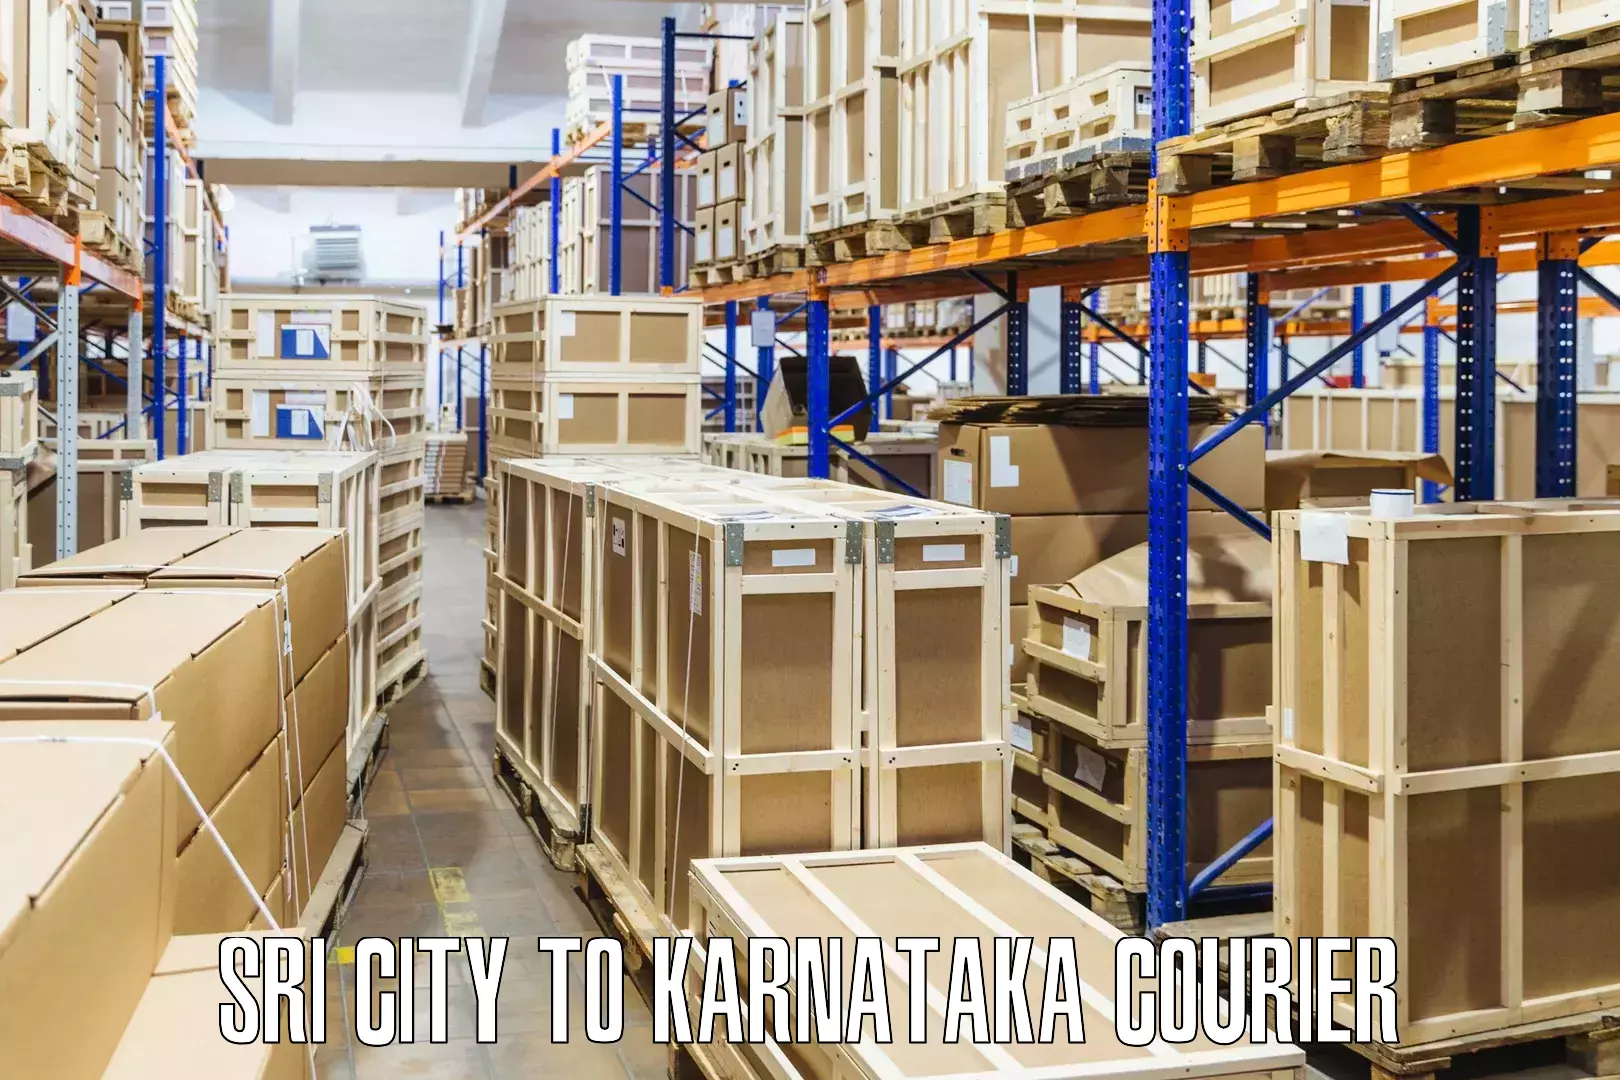 Reliable parcel services in Sri City to Koppal